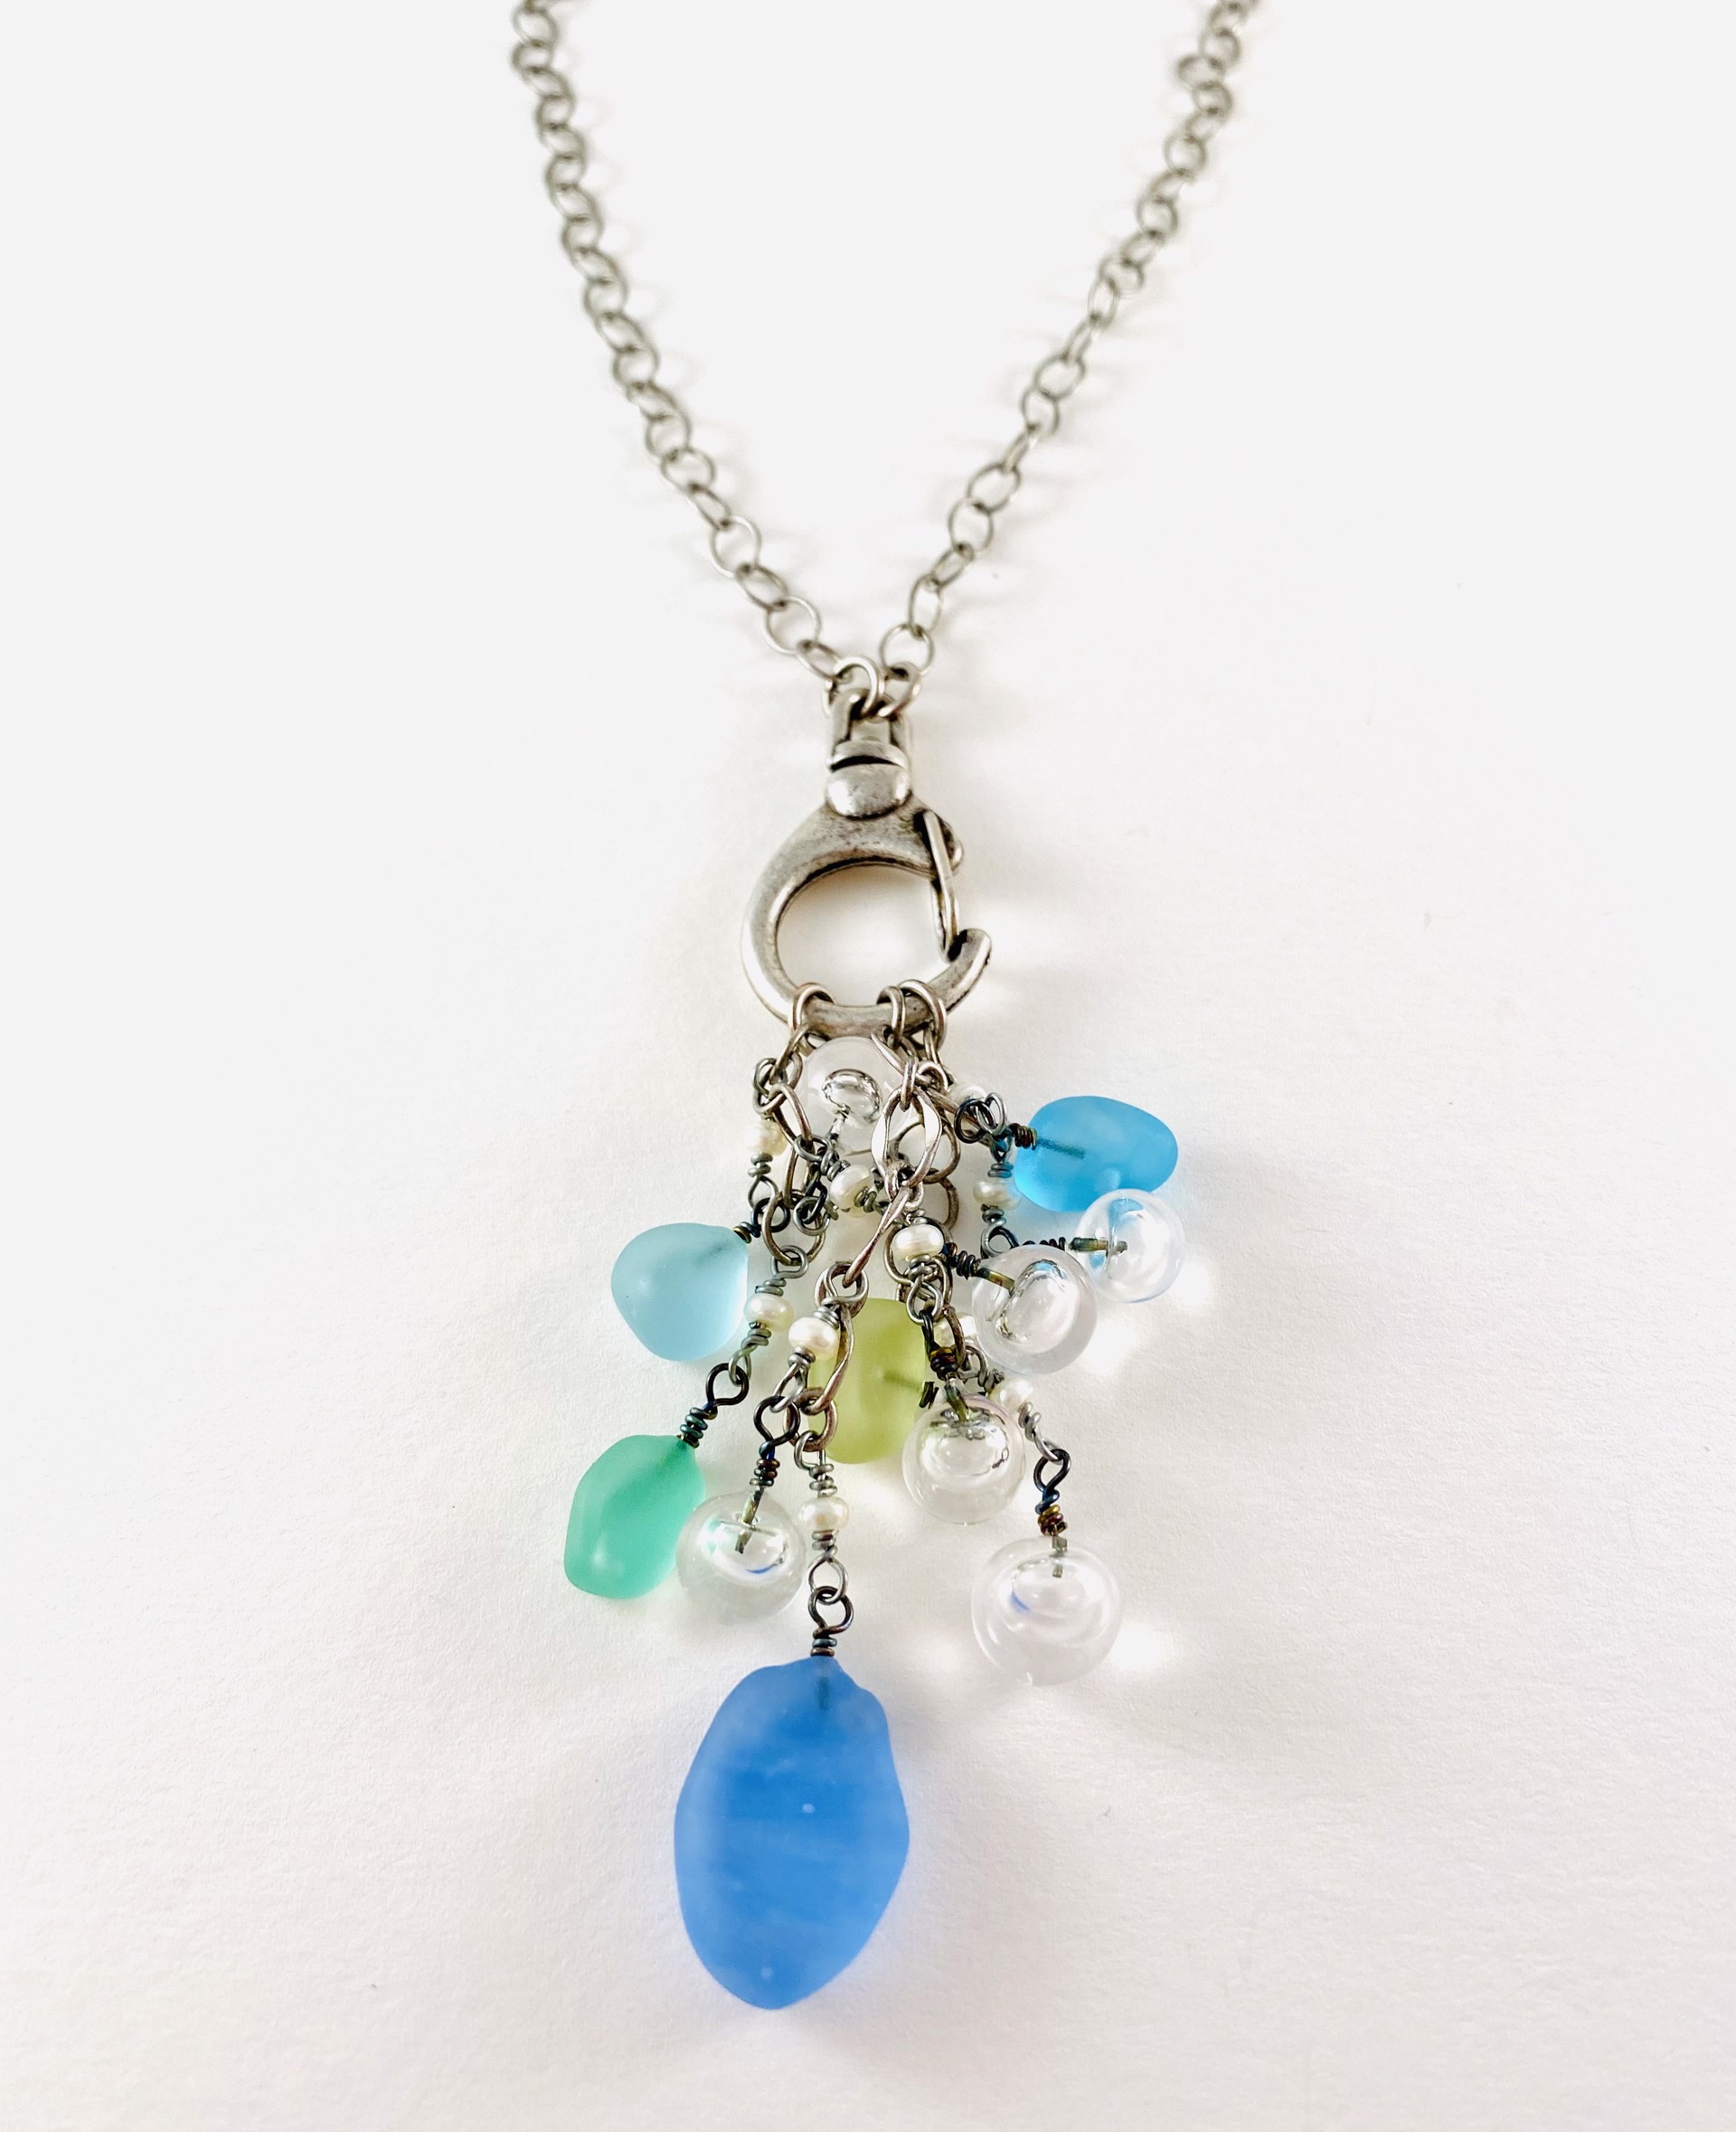 "Sea Glass" Bead Cluster Pendant with Seed Pearls, metal chain by Linda Sacra